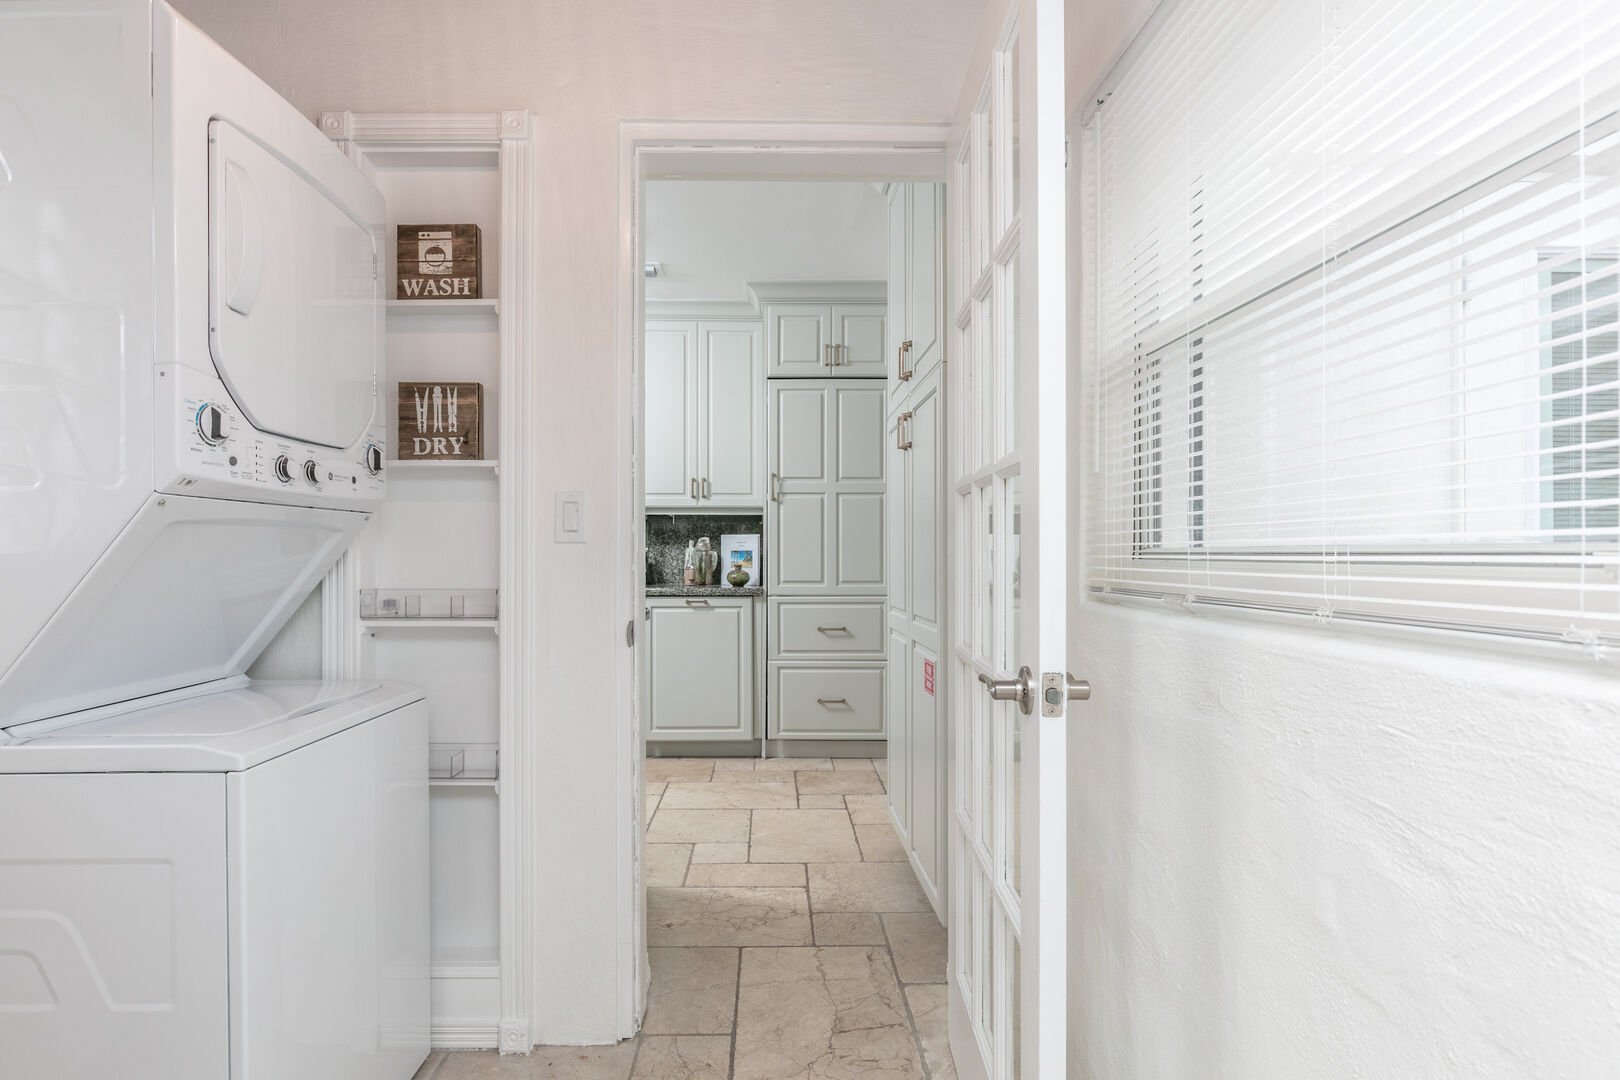 Hidden away next to the kitchen is the laundry room, with a washer/dryer combo